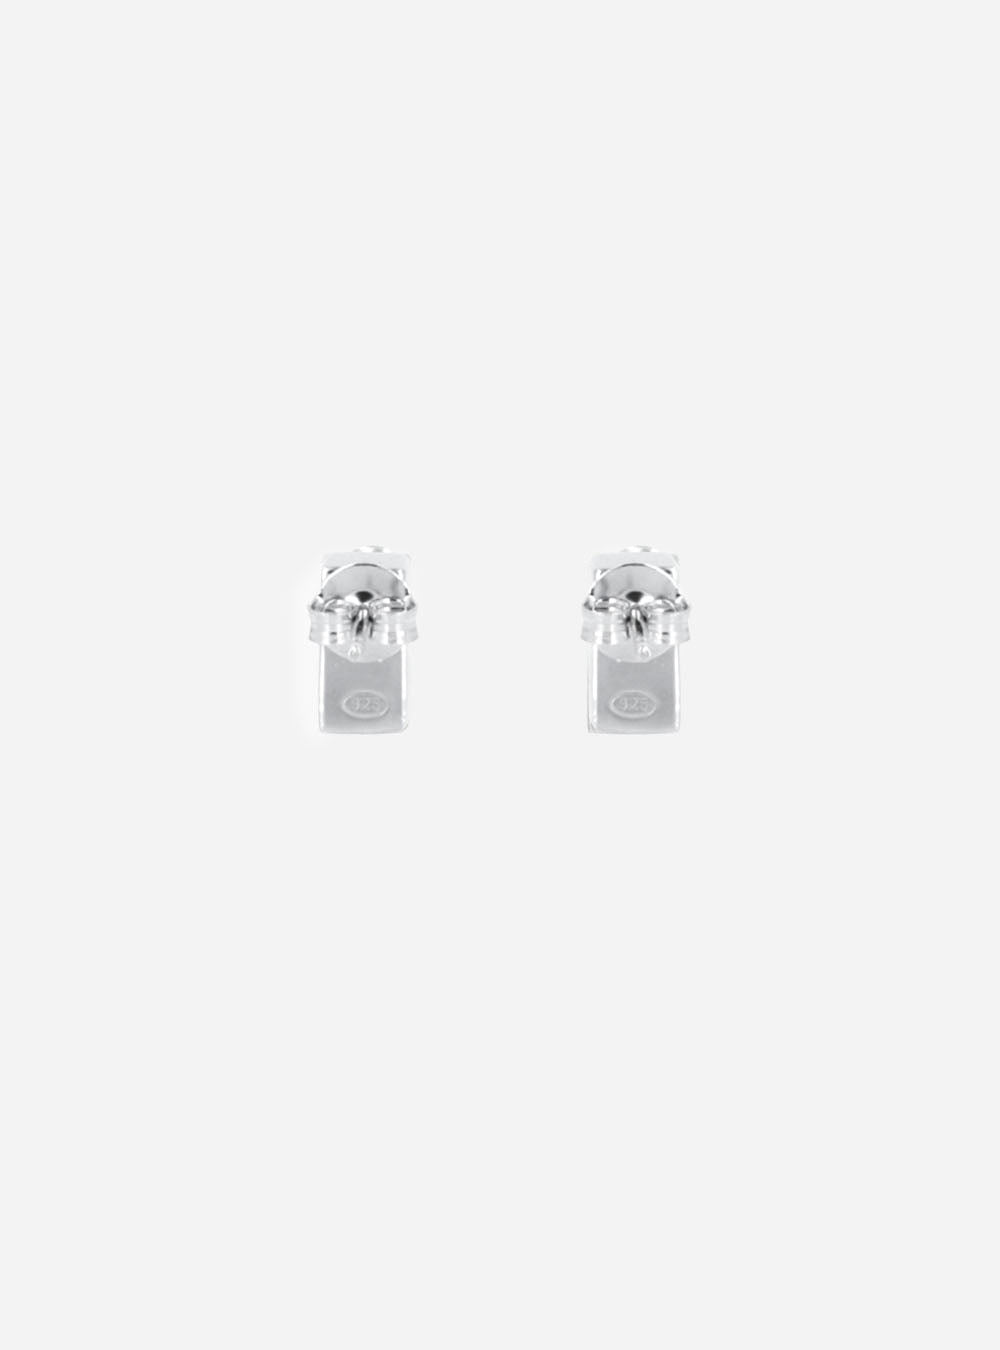 A pair of MIDNIGHTFACTORY Screwbox earrings on a white background.